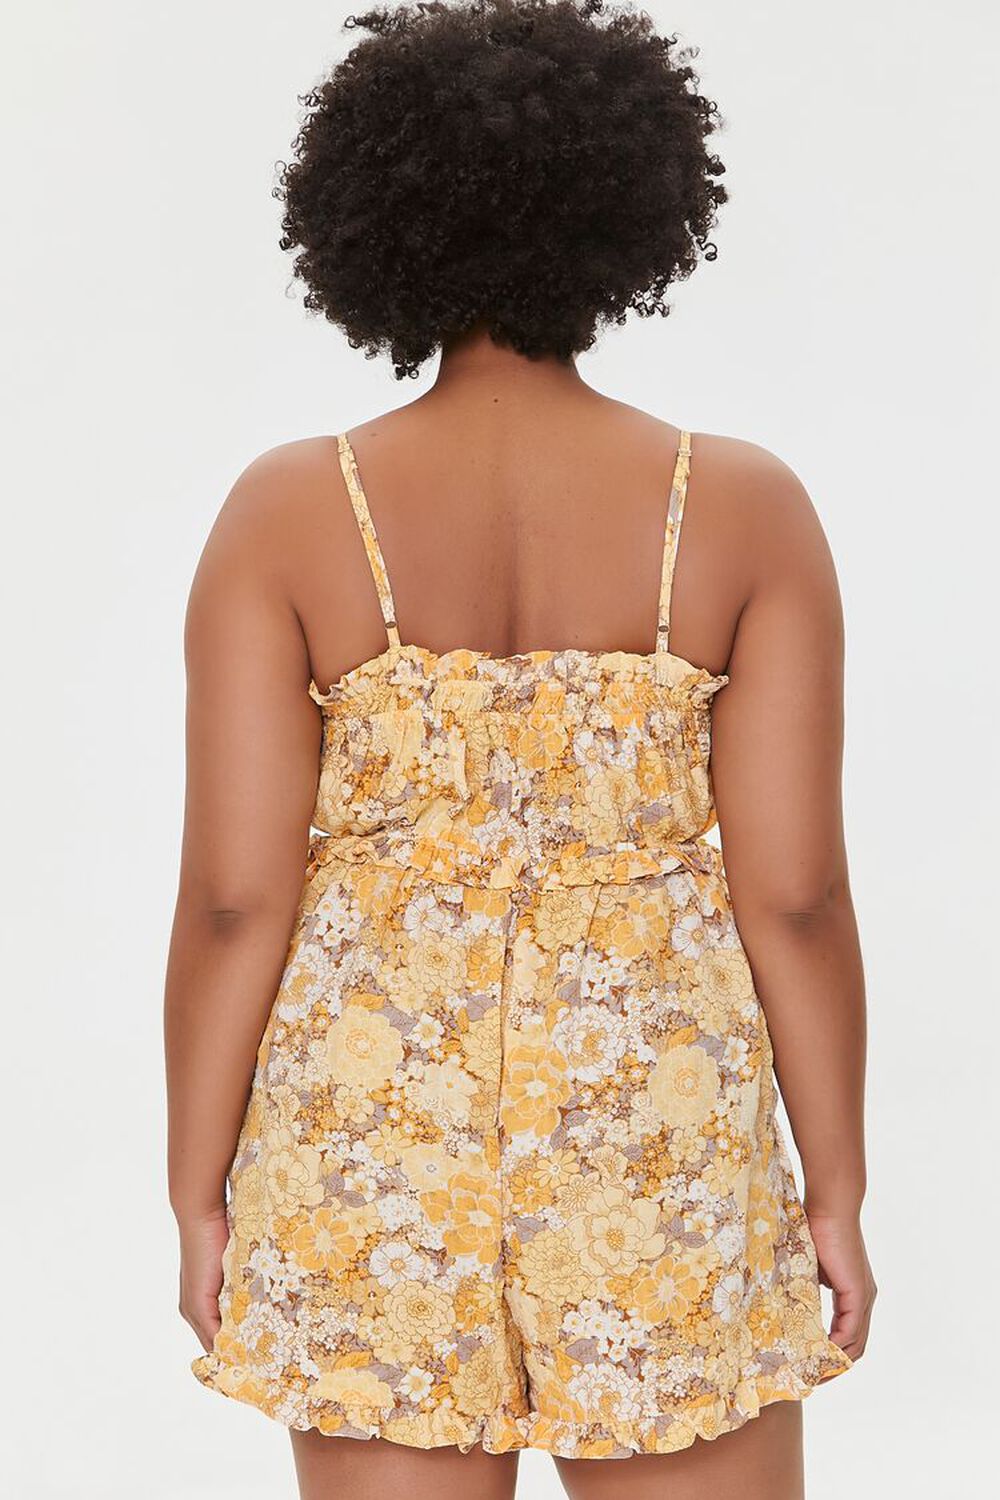 Plus Size Floral Ruffled Romper, image 3